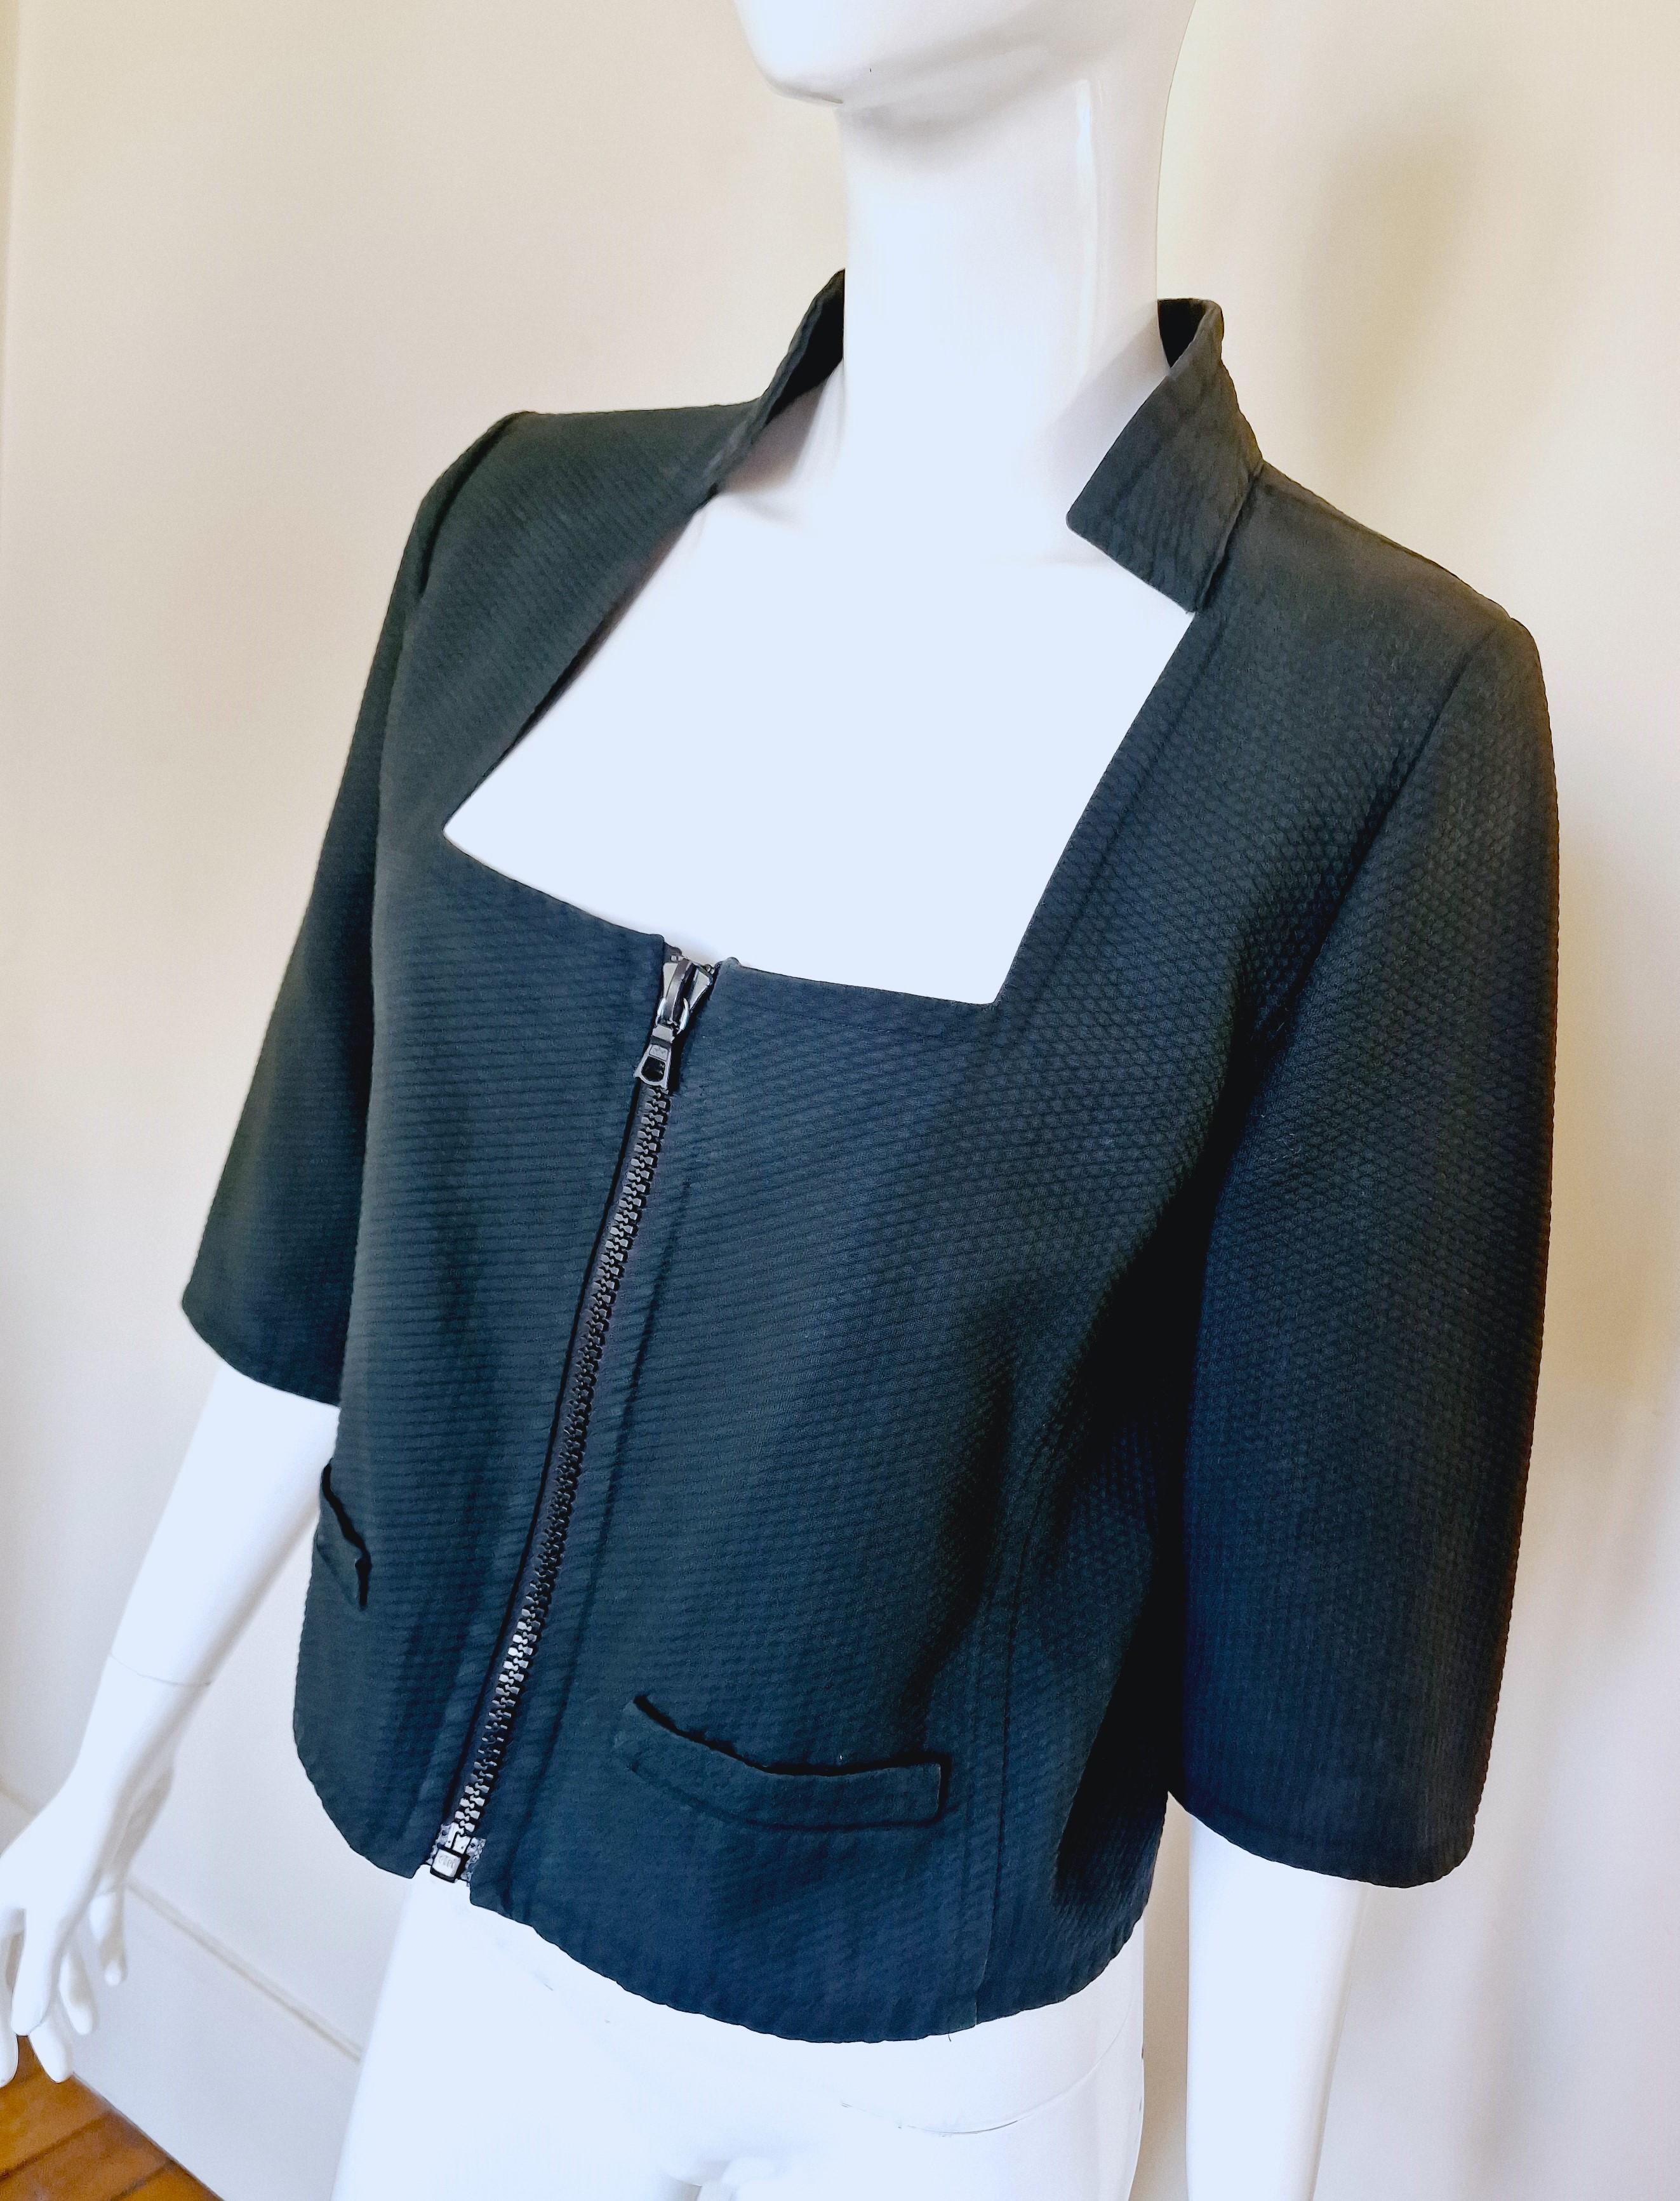 Crop top/jacket by André Courrèges!
Square neck. 
Big zipper.
There is a matching dress, it is sold separatly!
100% cotton.

VERY GOOD condition!

SIZE
X-Large.
Marked size: FR42.
Length: 47 cm / 18.5 inch
Bust: 50 cm / 19.7 inch
Waist: 46 cm / 18.1